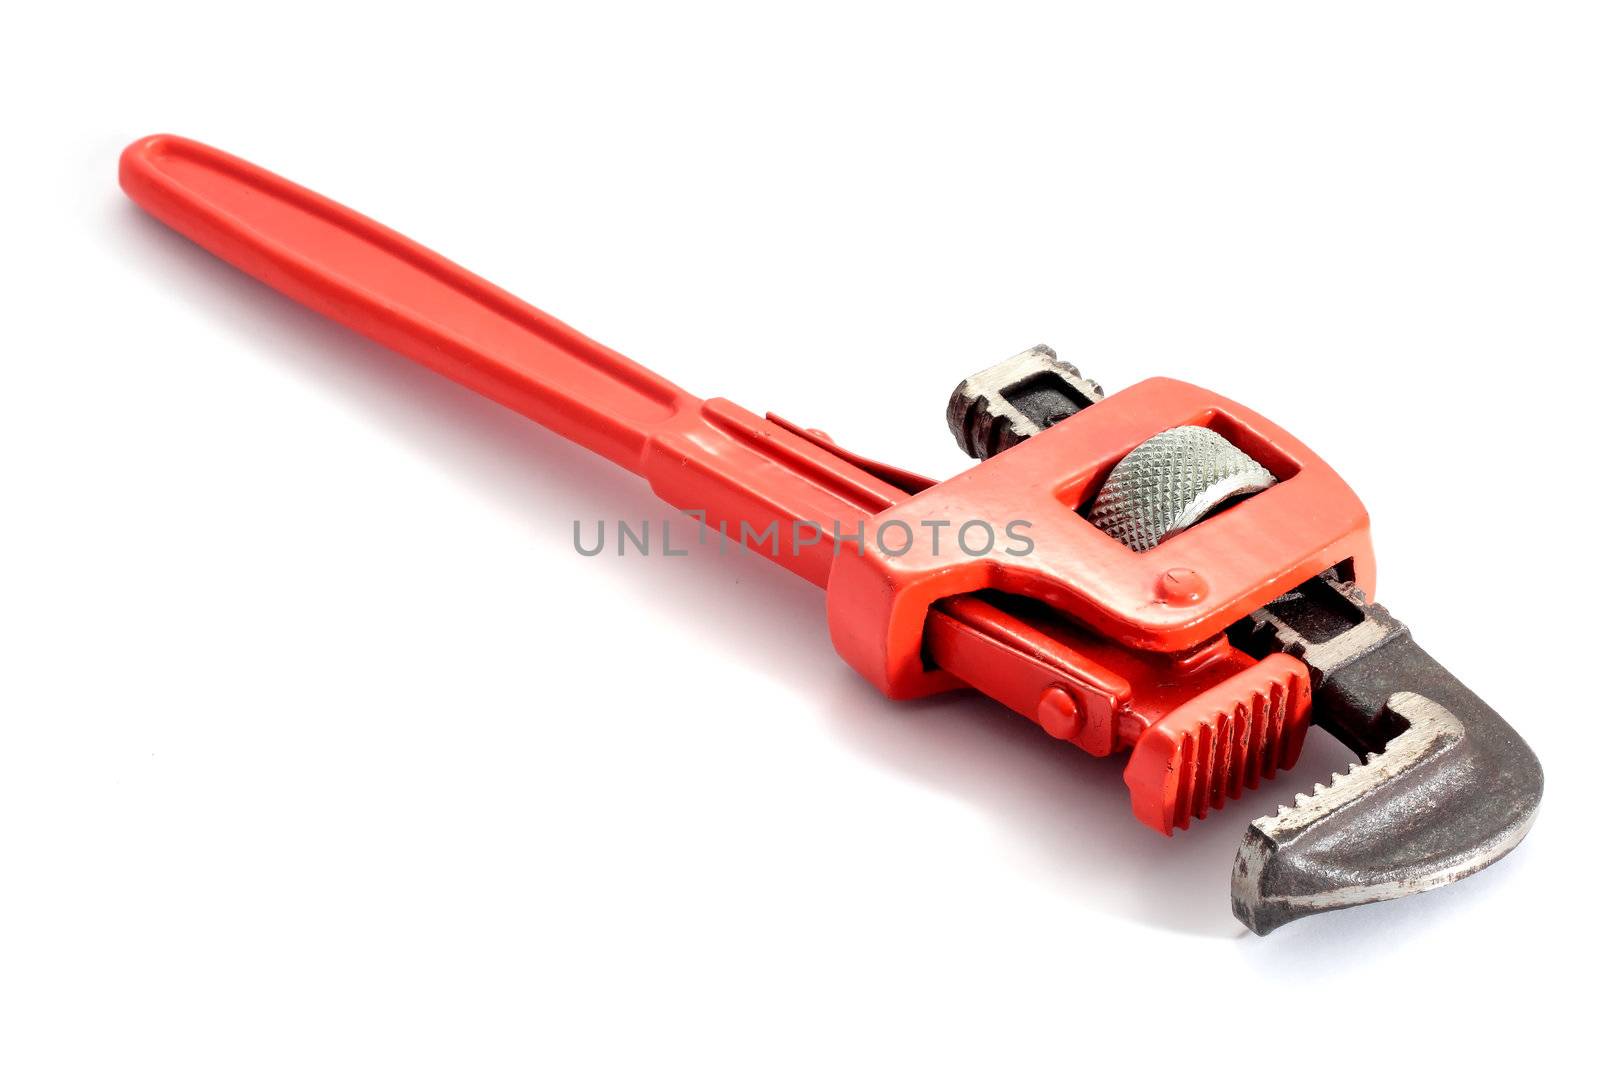 adjustable spanner colored red for plumbing isolated on fund in horizontal